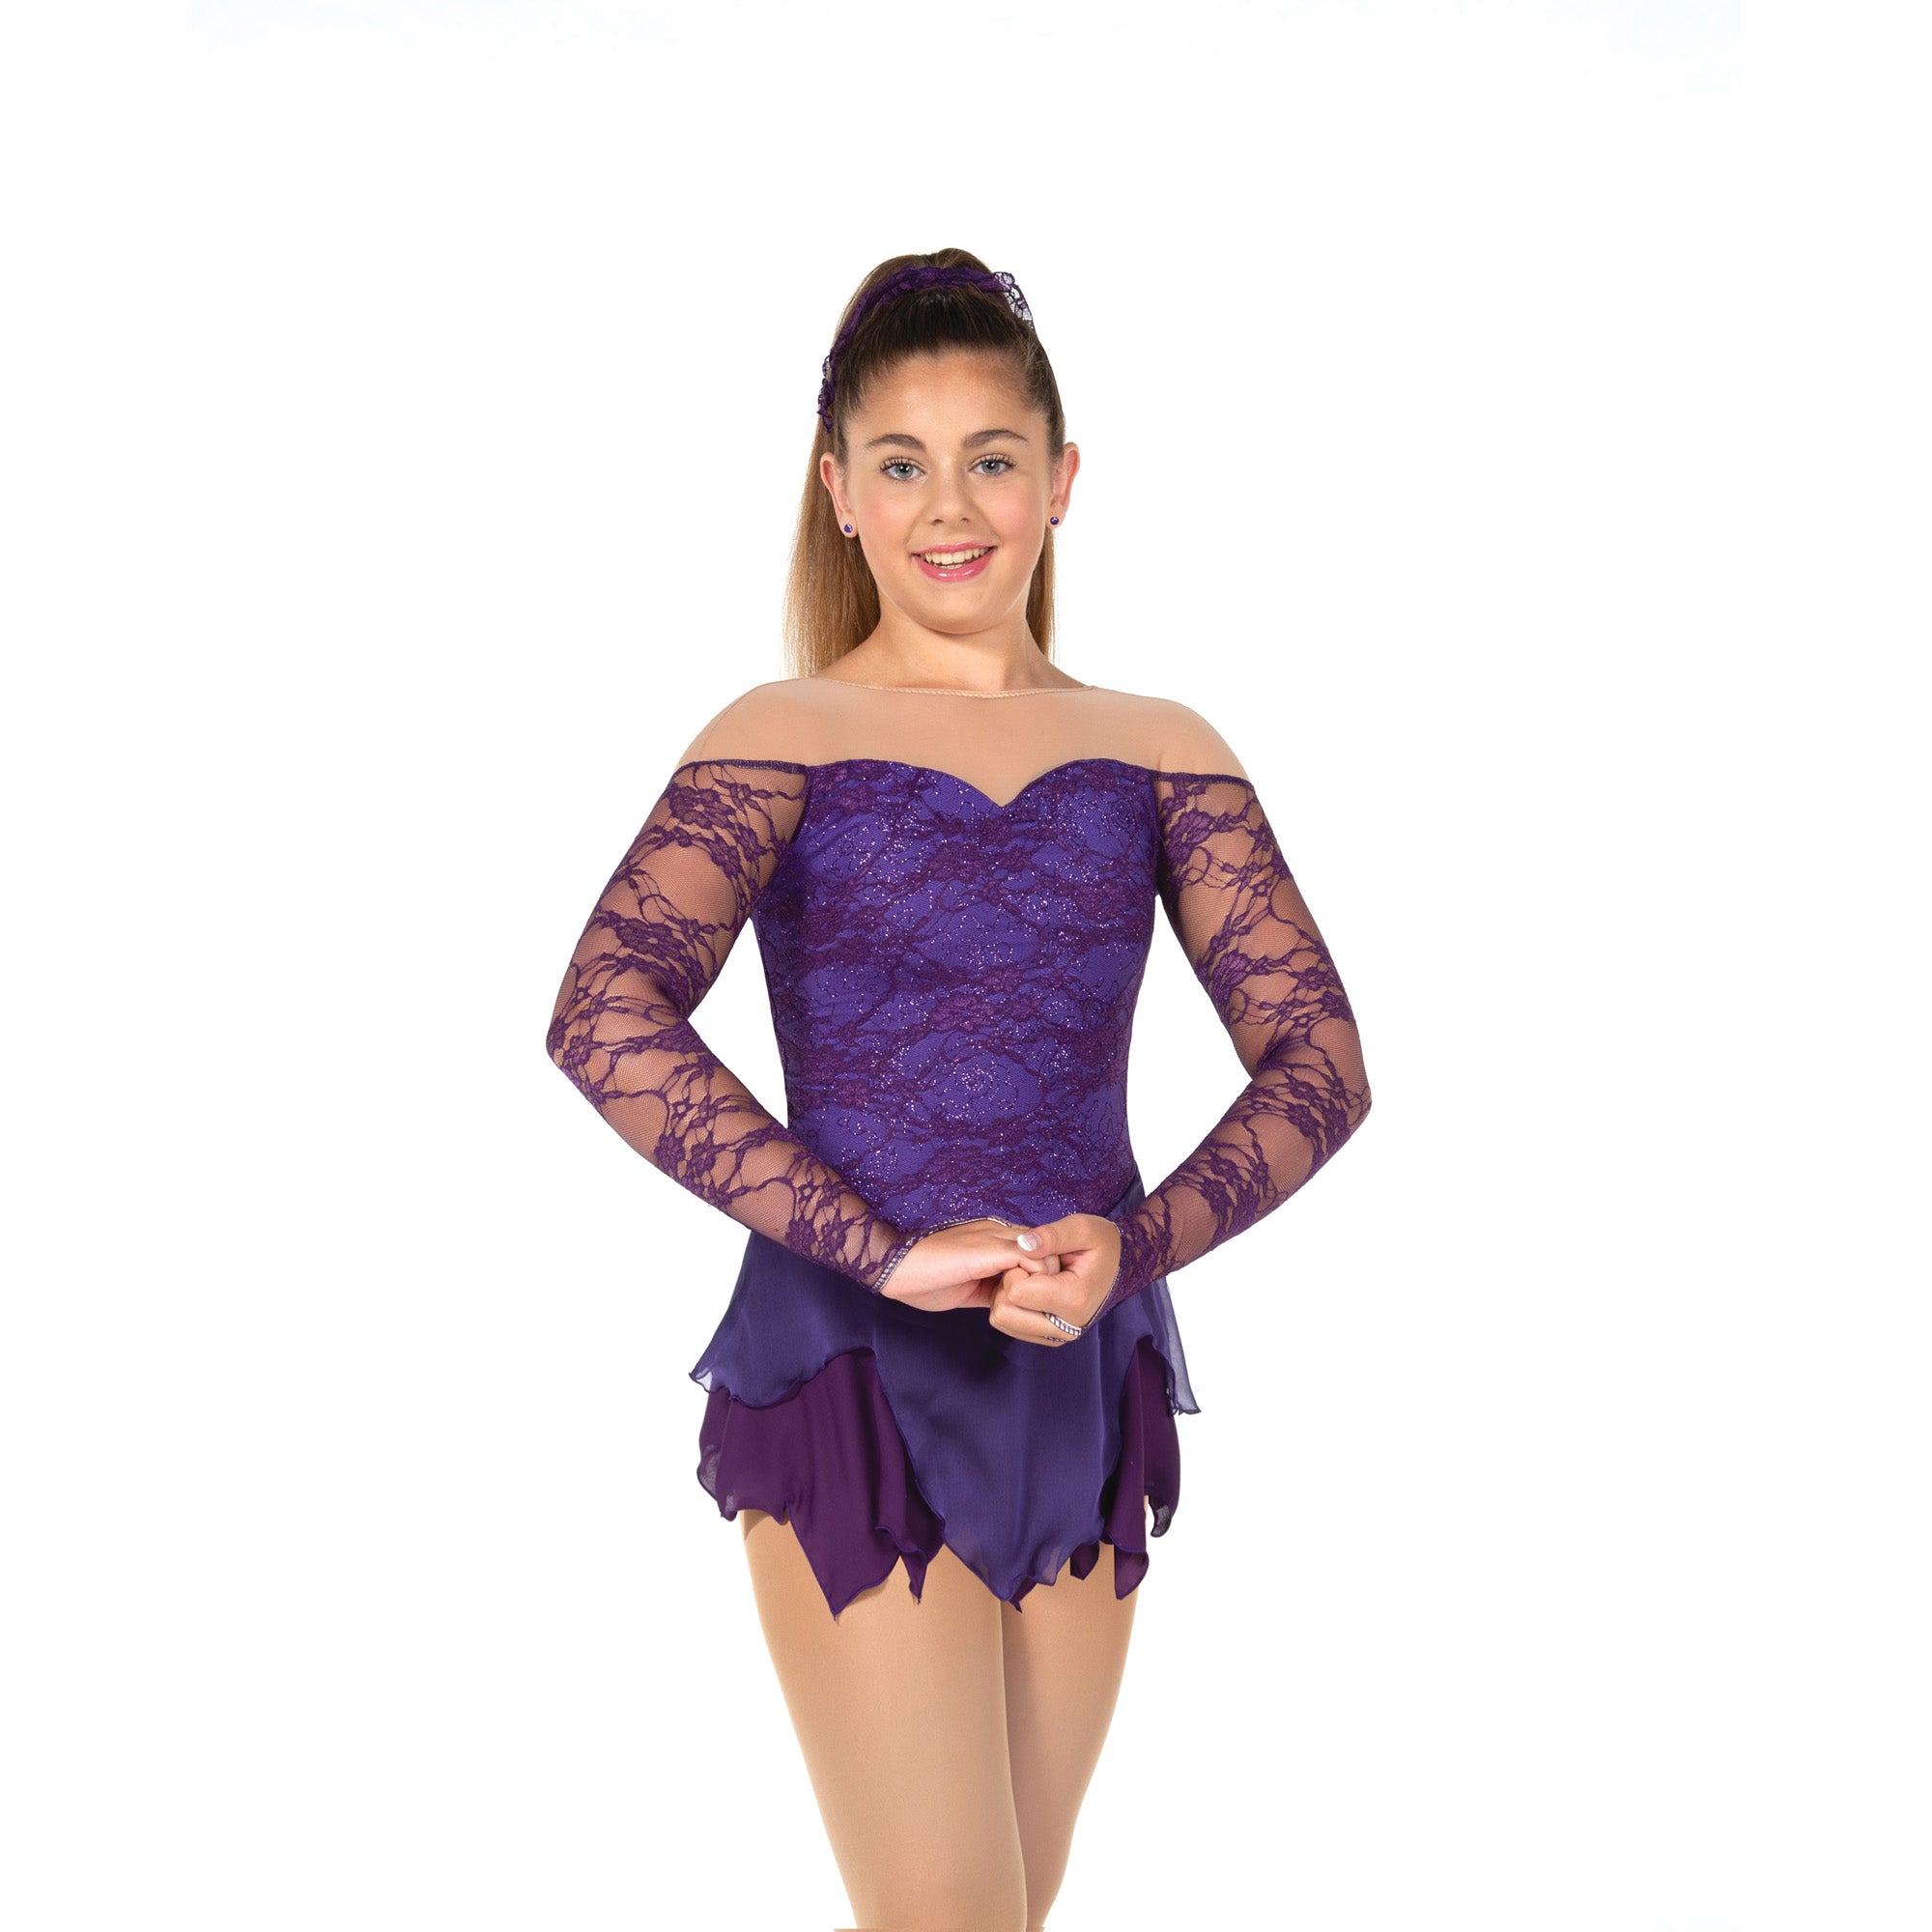 41 Botanical Lace Skating Dress in purple by Jerry's